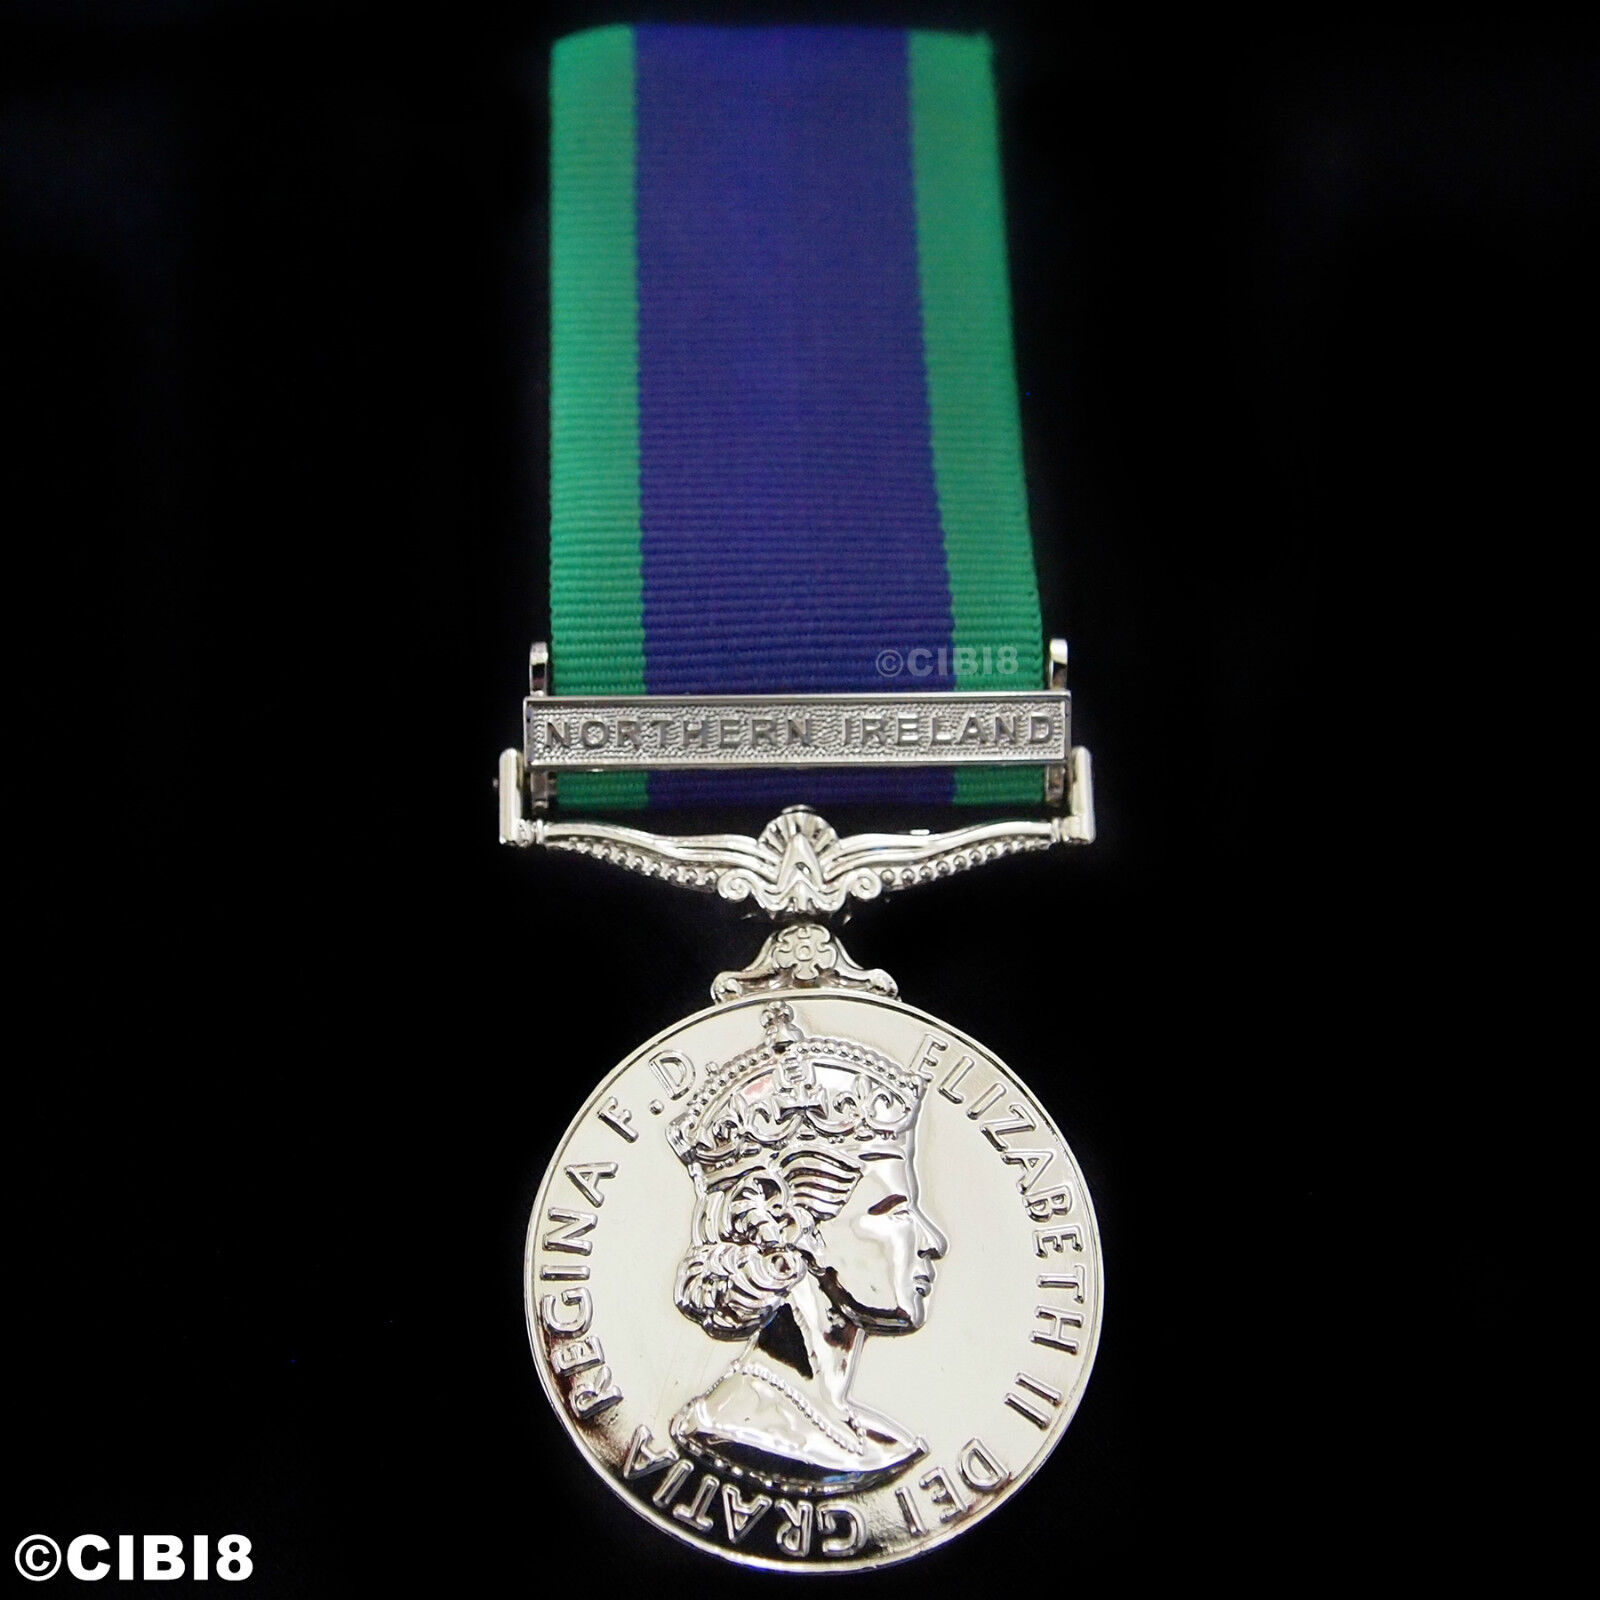 FULL SIZE GENERAL SERVICE MEDAL WITH NORTHERN IRELAND CLASP - NI GSM 1962 REPRO